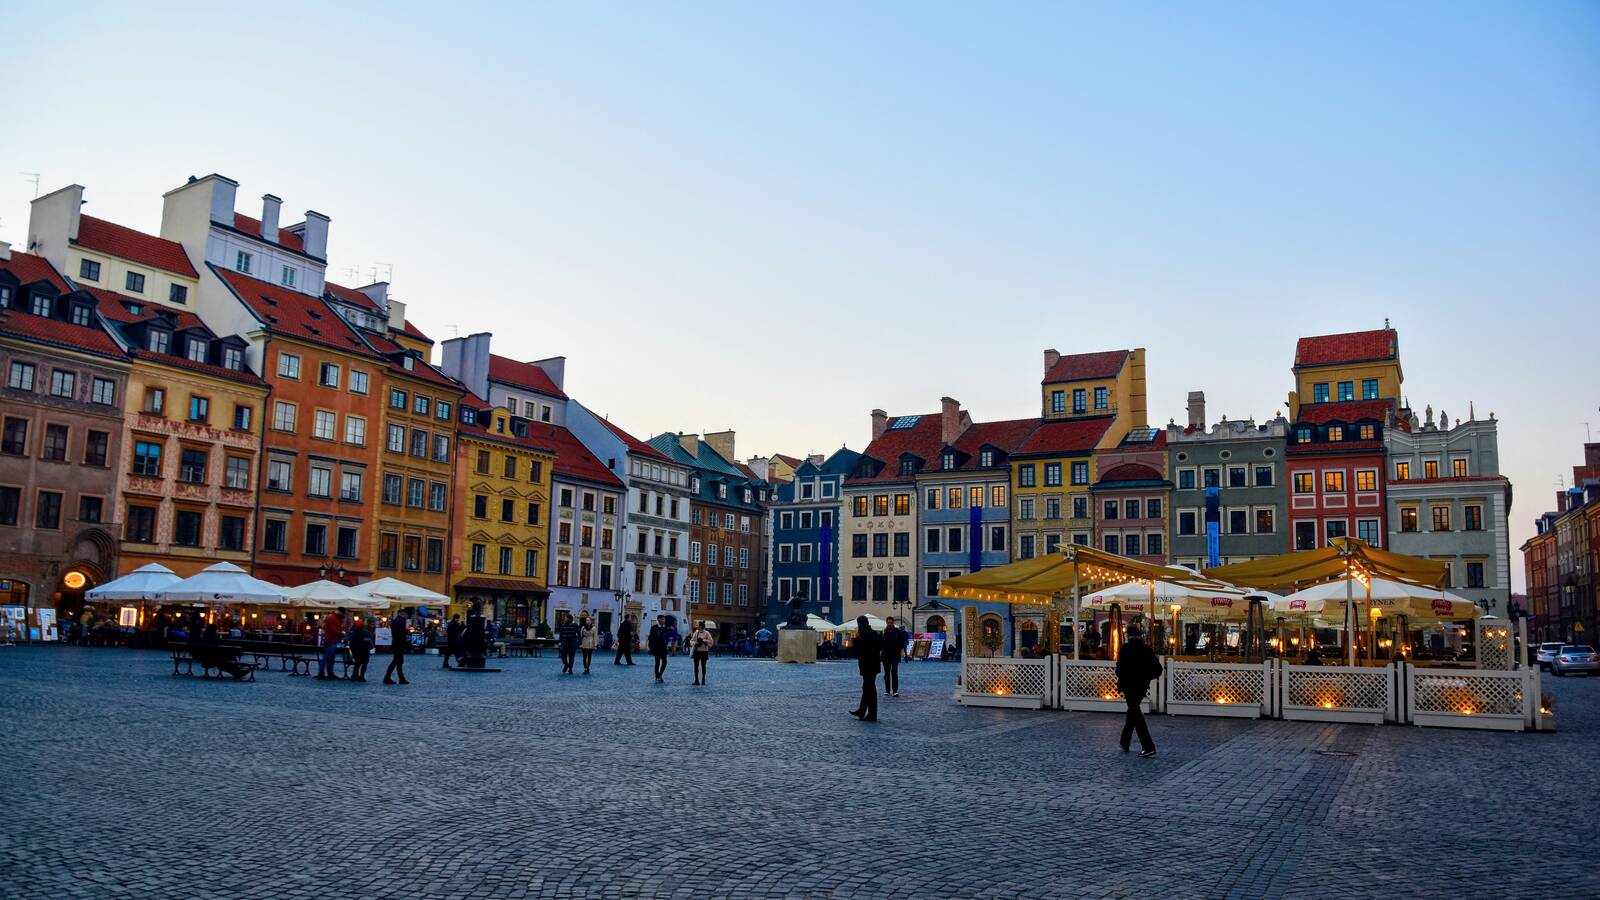 Image of Warsaw Old Town Square by Lloyd De Jongh